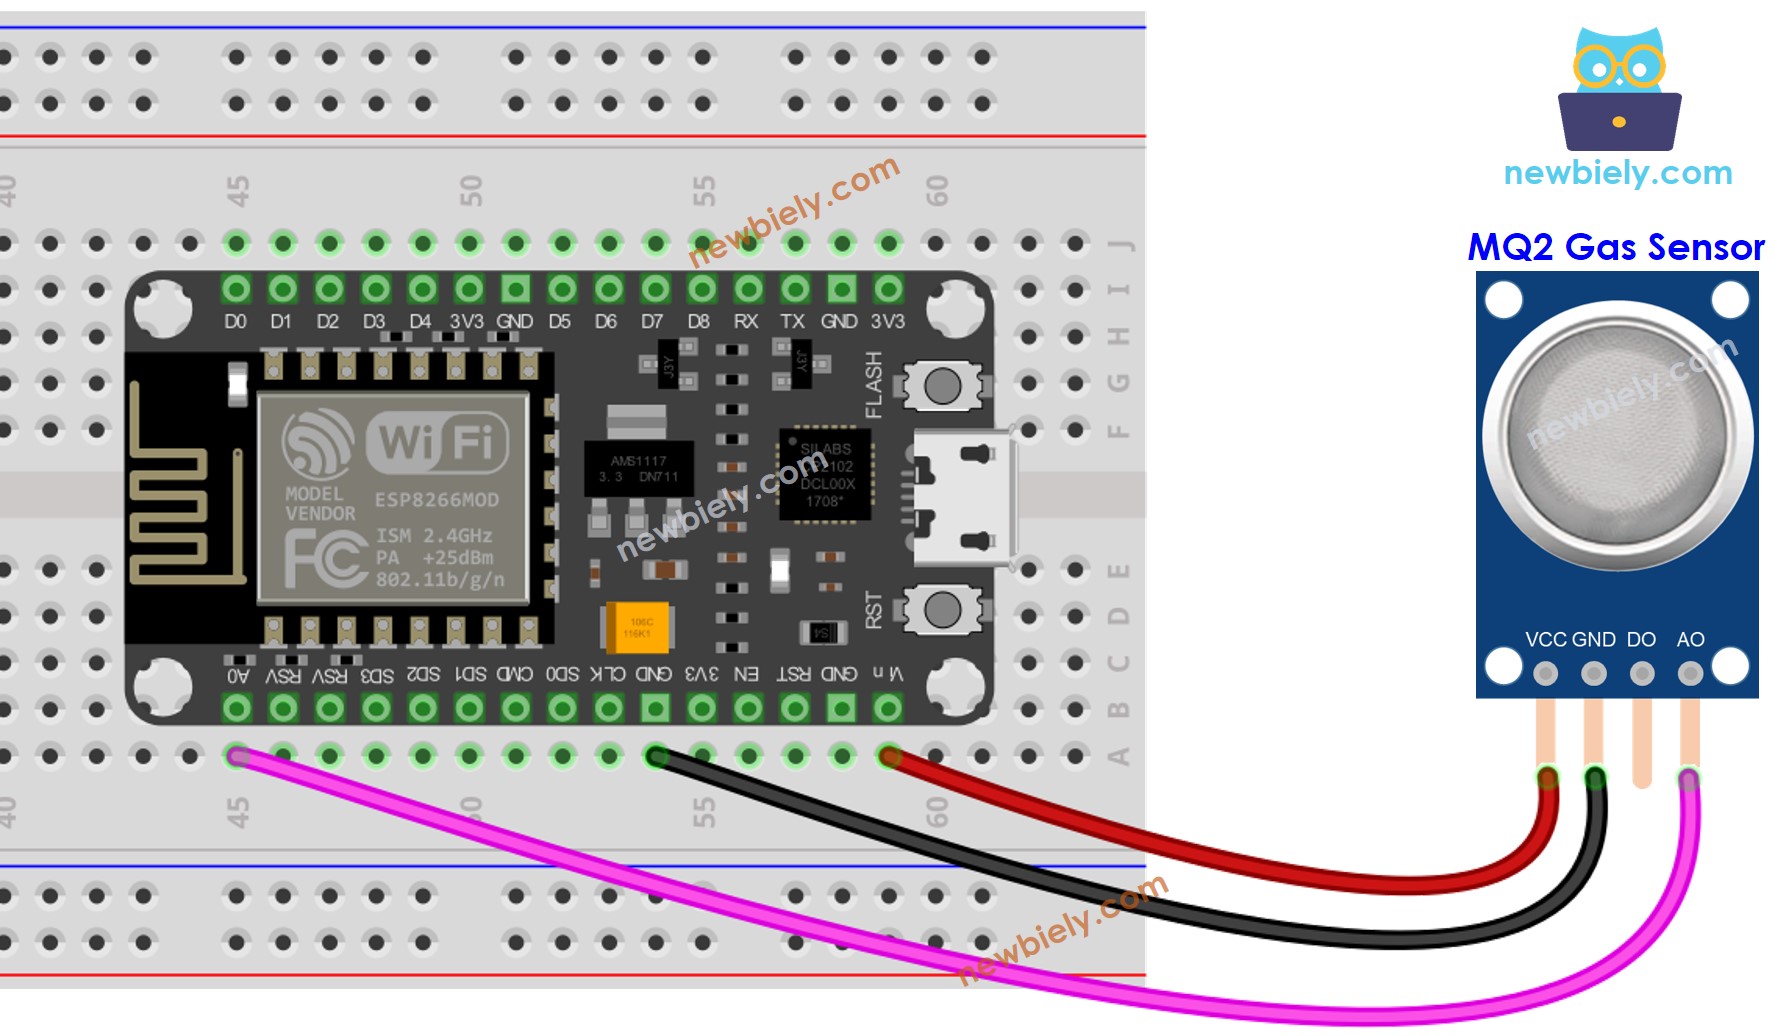 The wiring diagram between ESP8266 NodeMCU and air quality